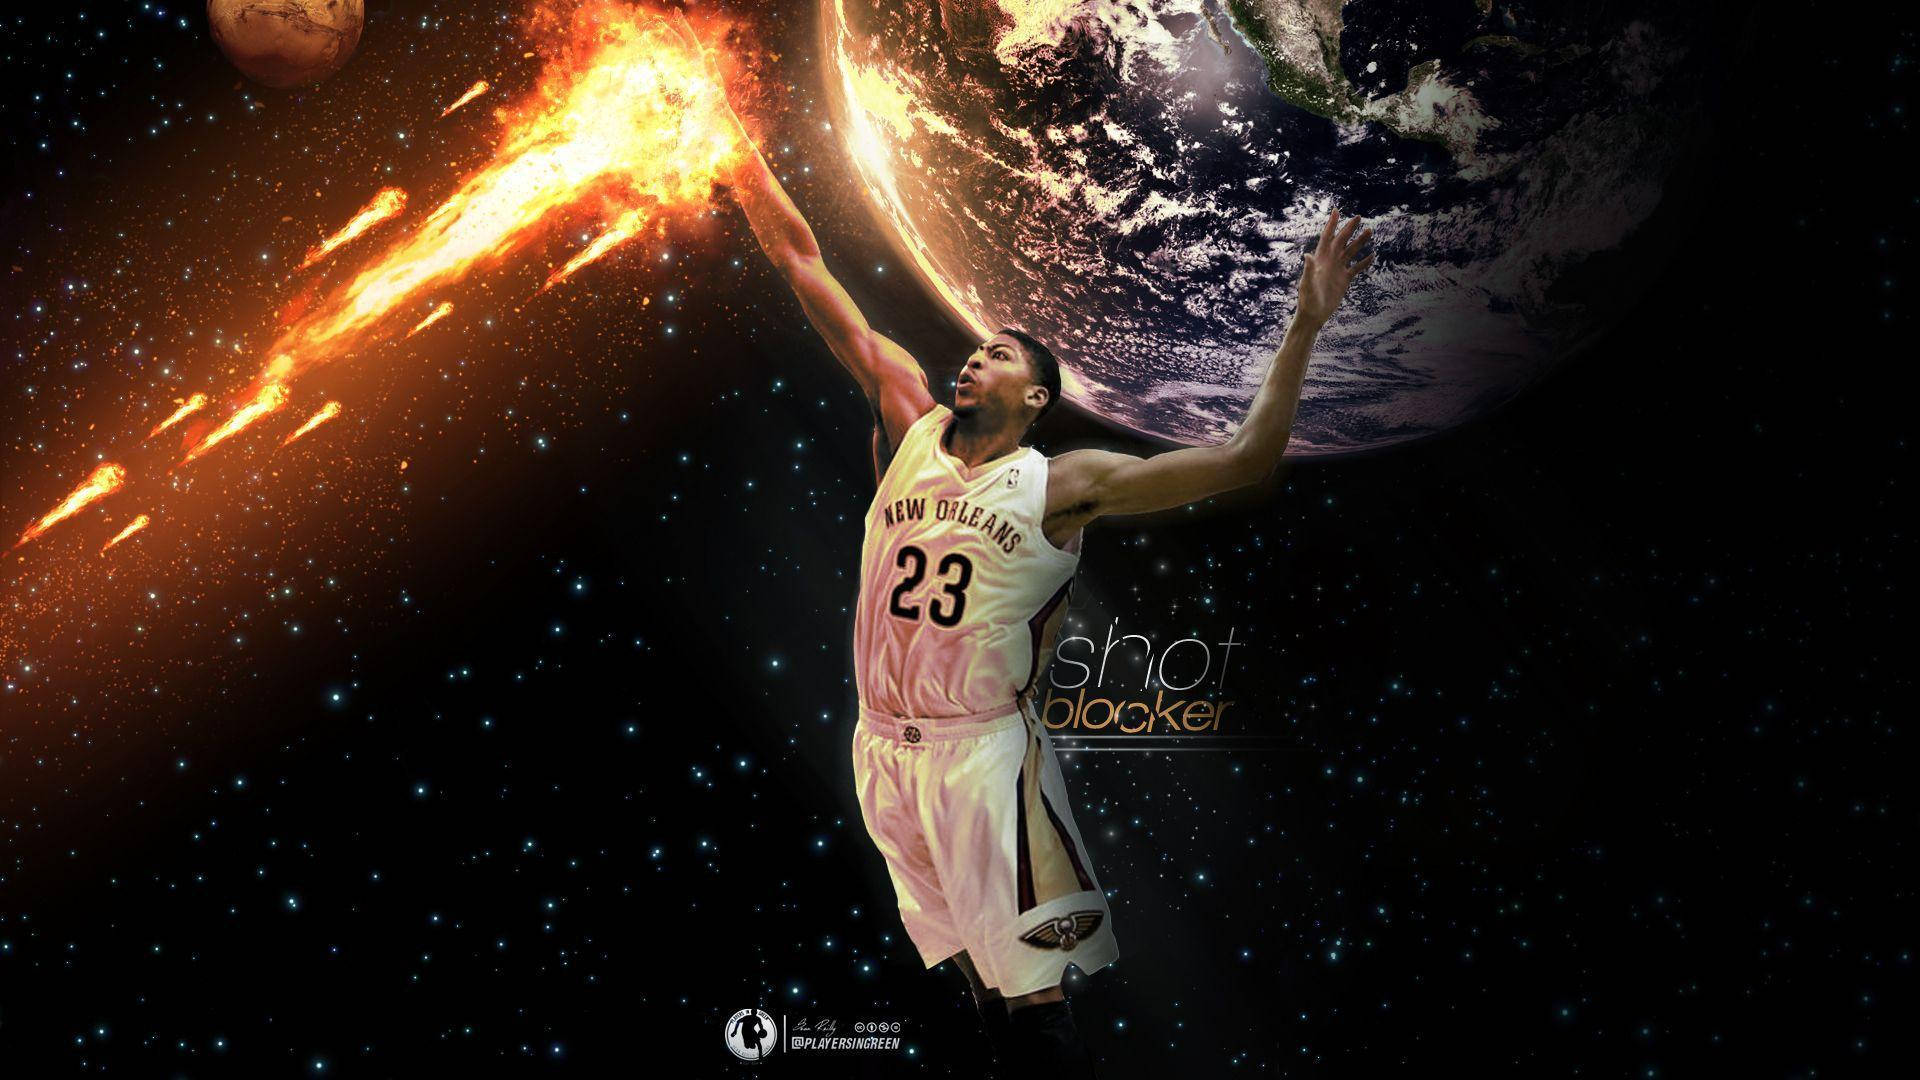 Anthony Davis 1920X1080 Wallpaper and Background Image